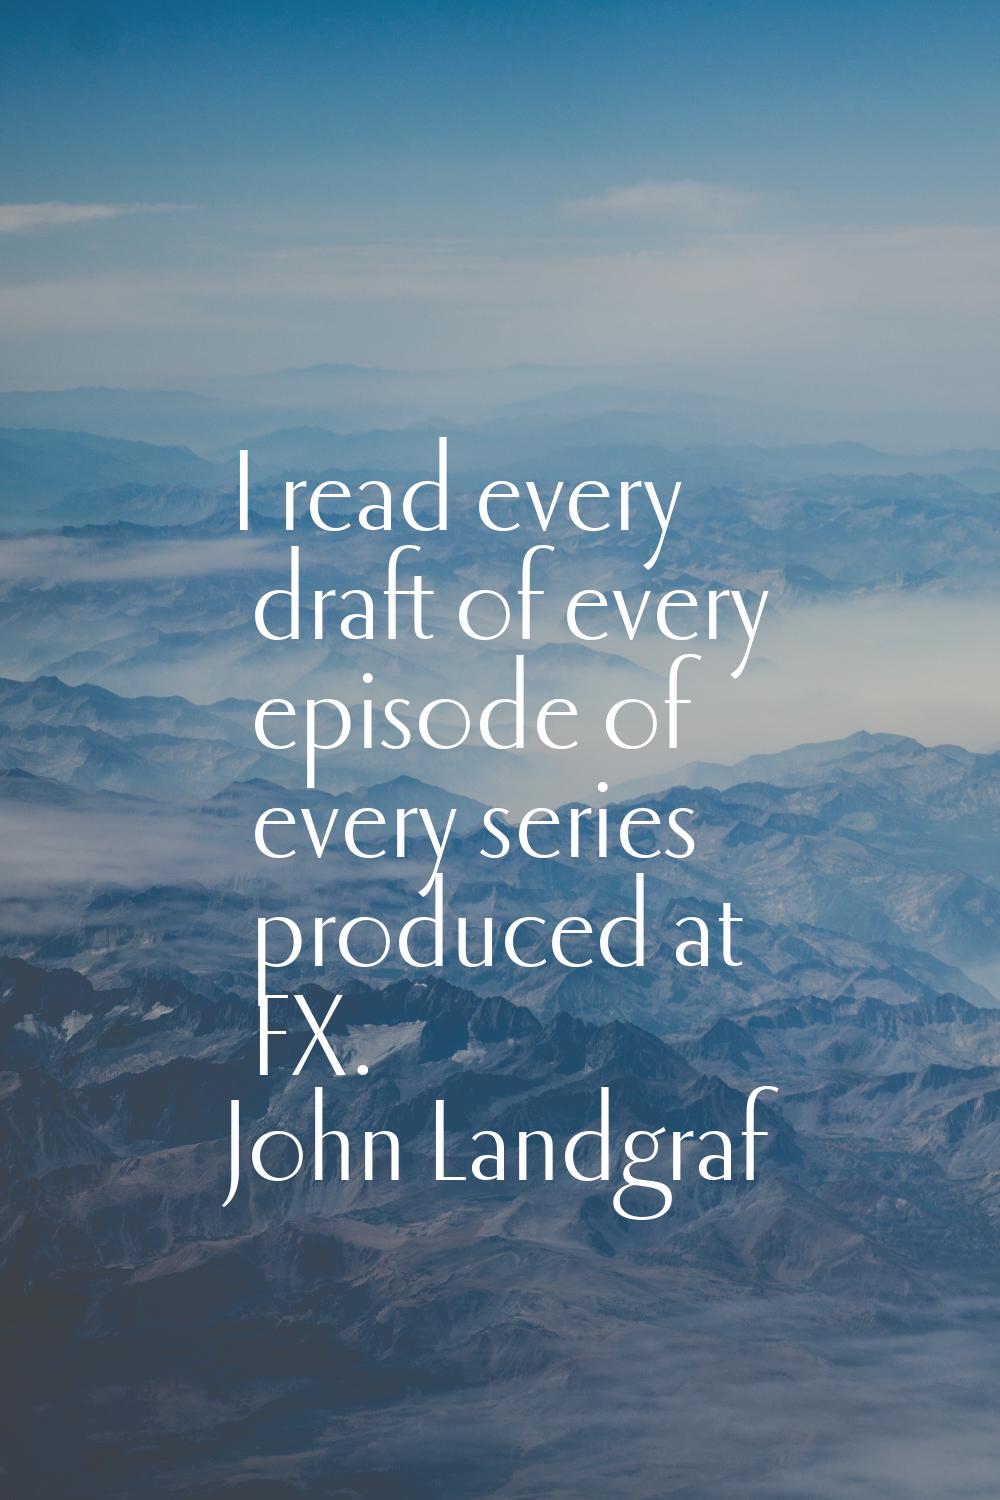 I read every draft of every episode of every series produced at FX.